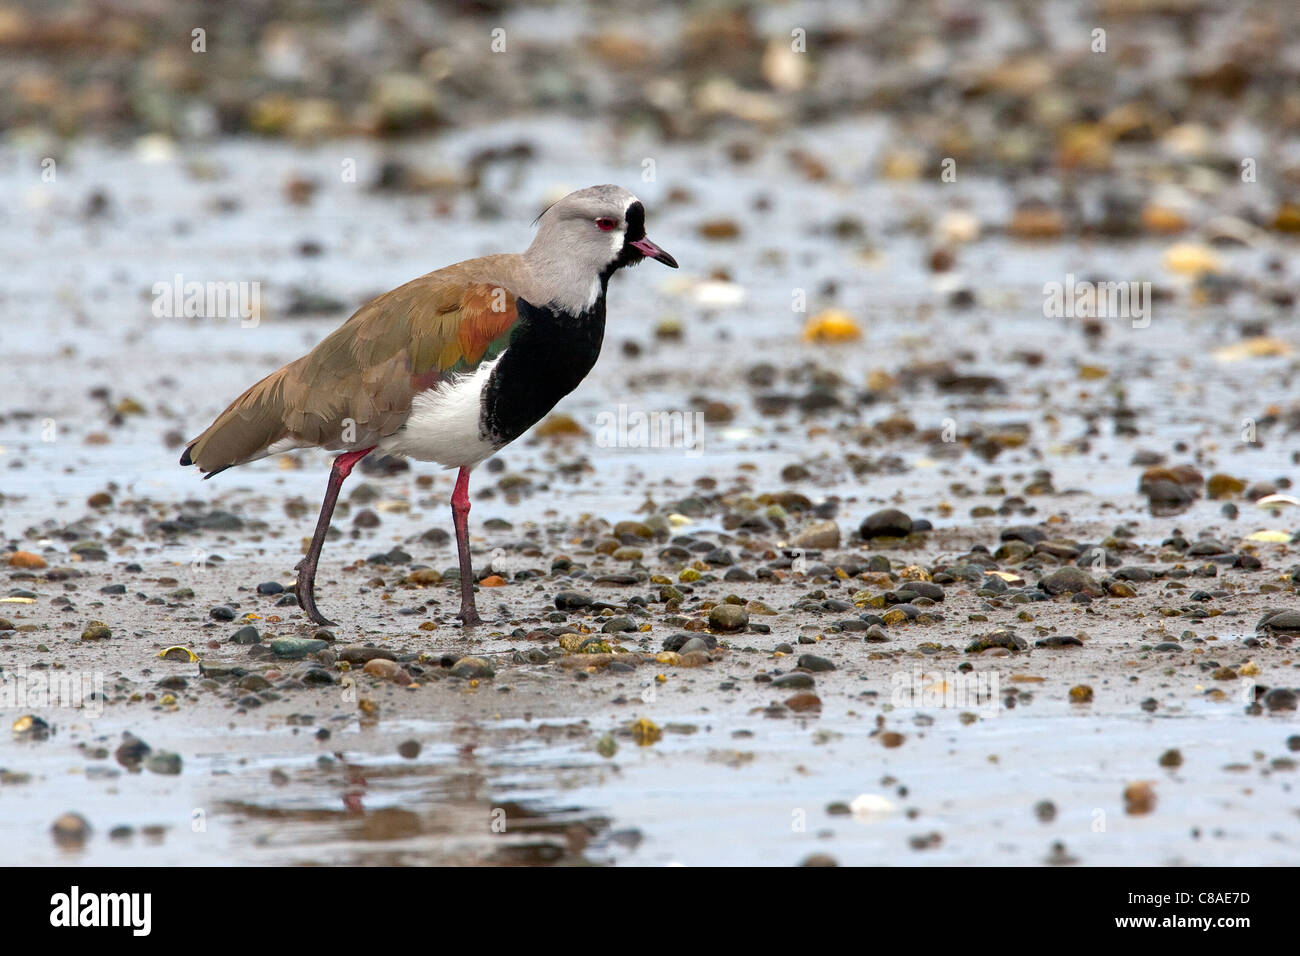 The Southern Lapwing (Vanellus chilensis) in Chile. Stock Photo